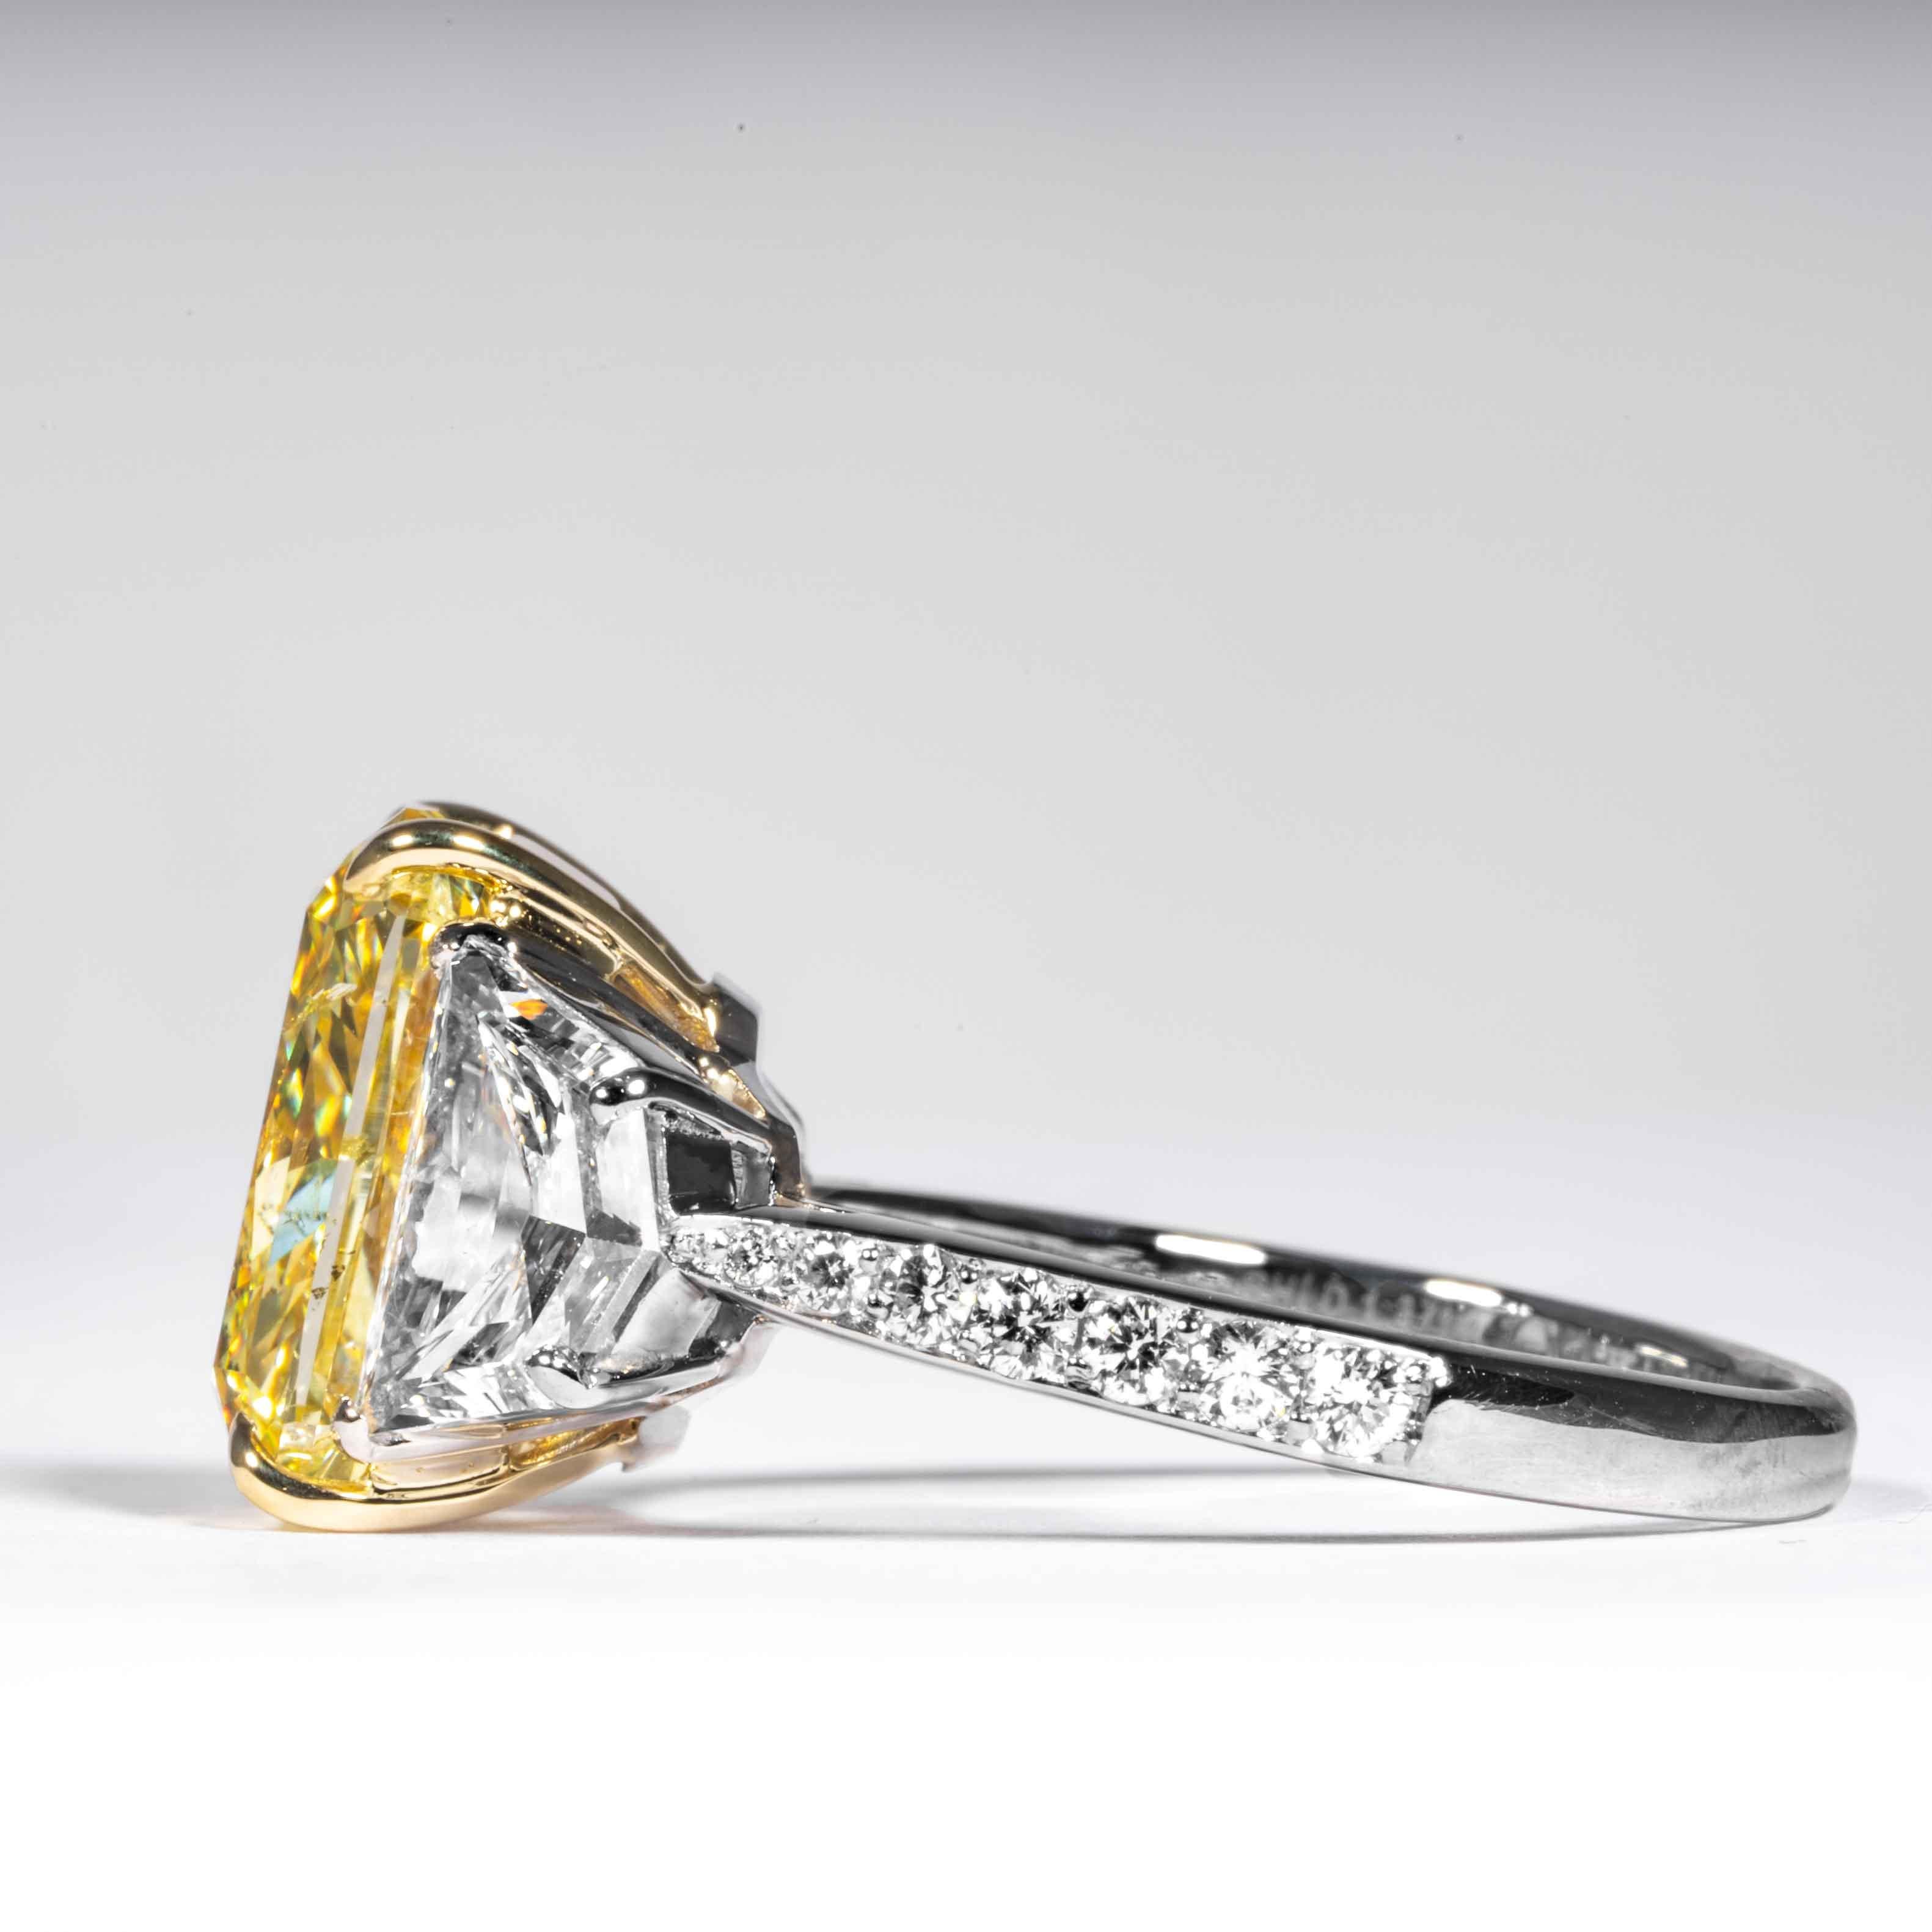 Radiant Cut Shreve, Crump & Low GIA Certified 5.07 Carat Fancy Intense Yellow Diamond Ring For Sale